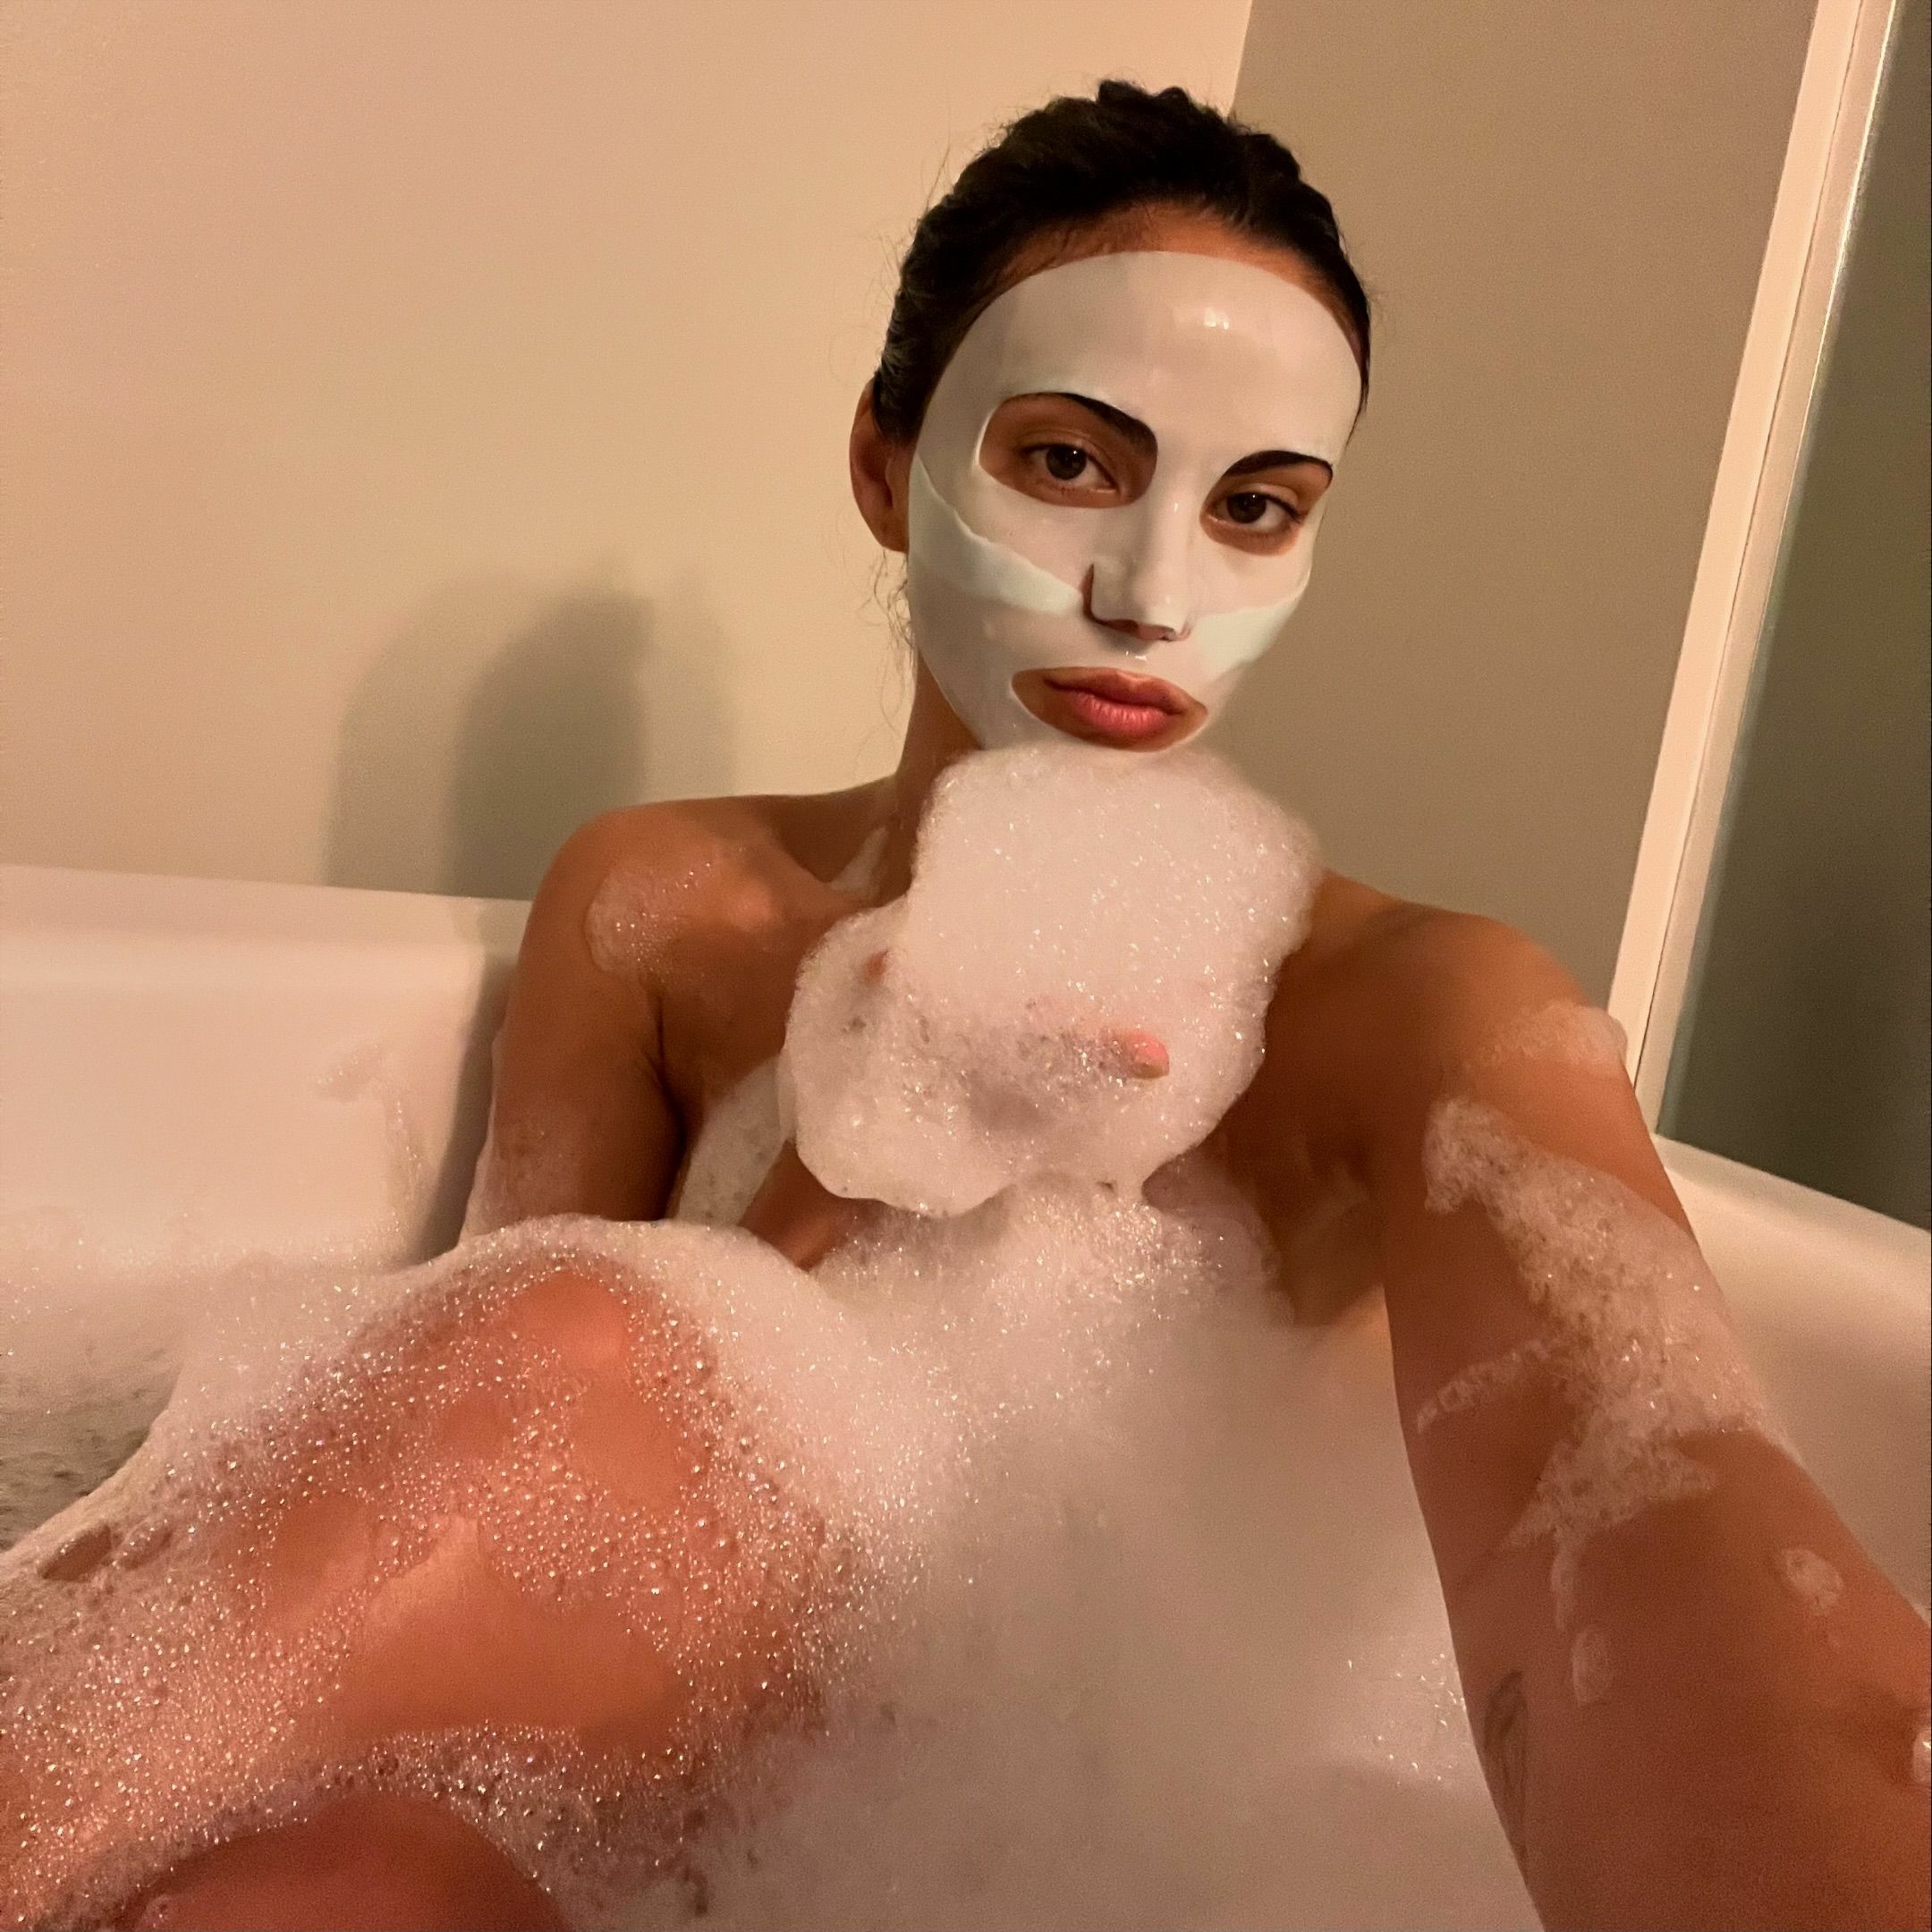 Camila Mendes Gives us A Self Care Selfie!